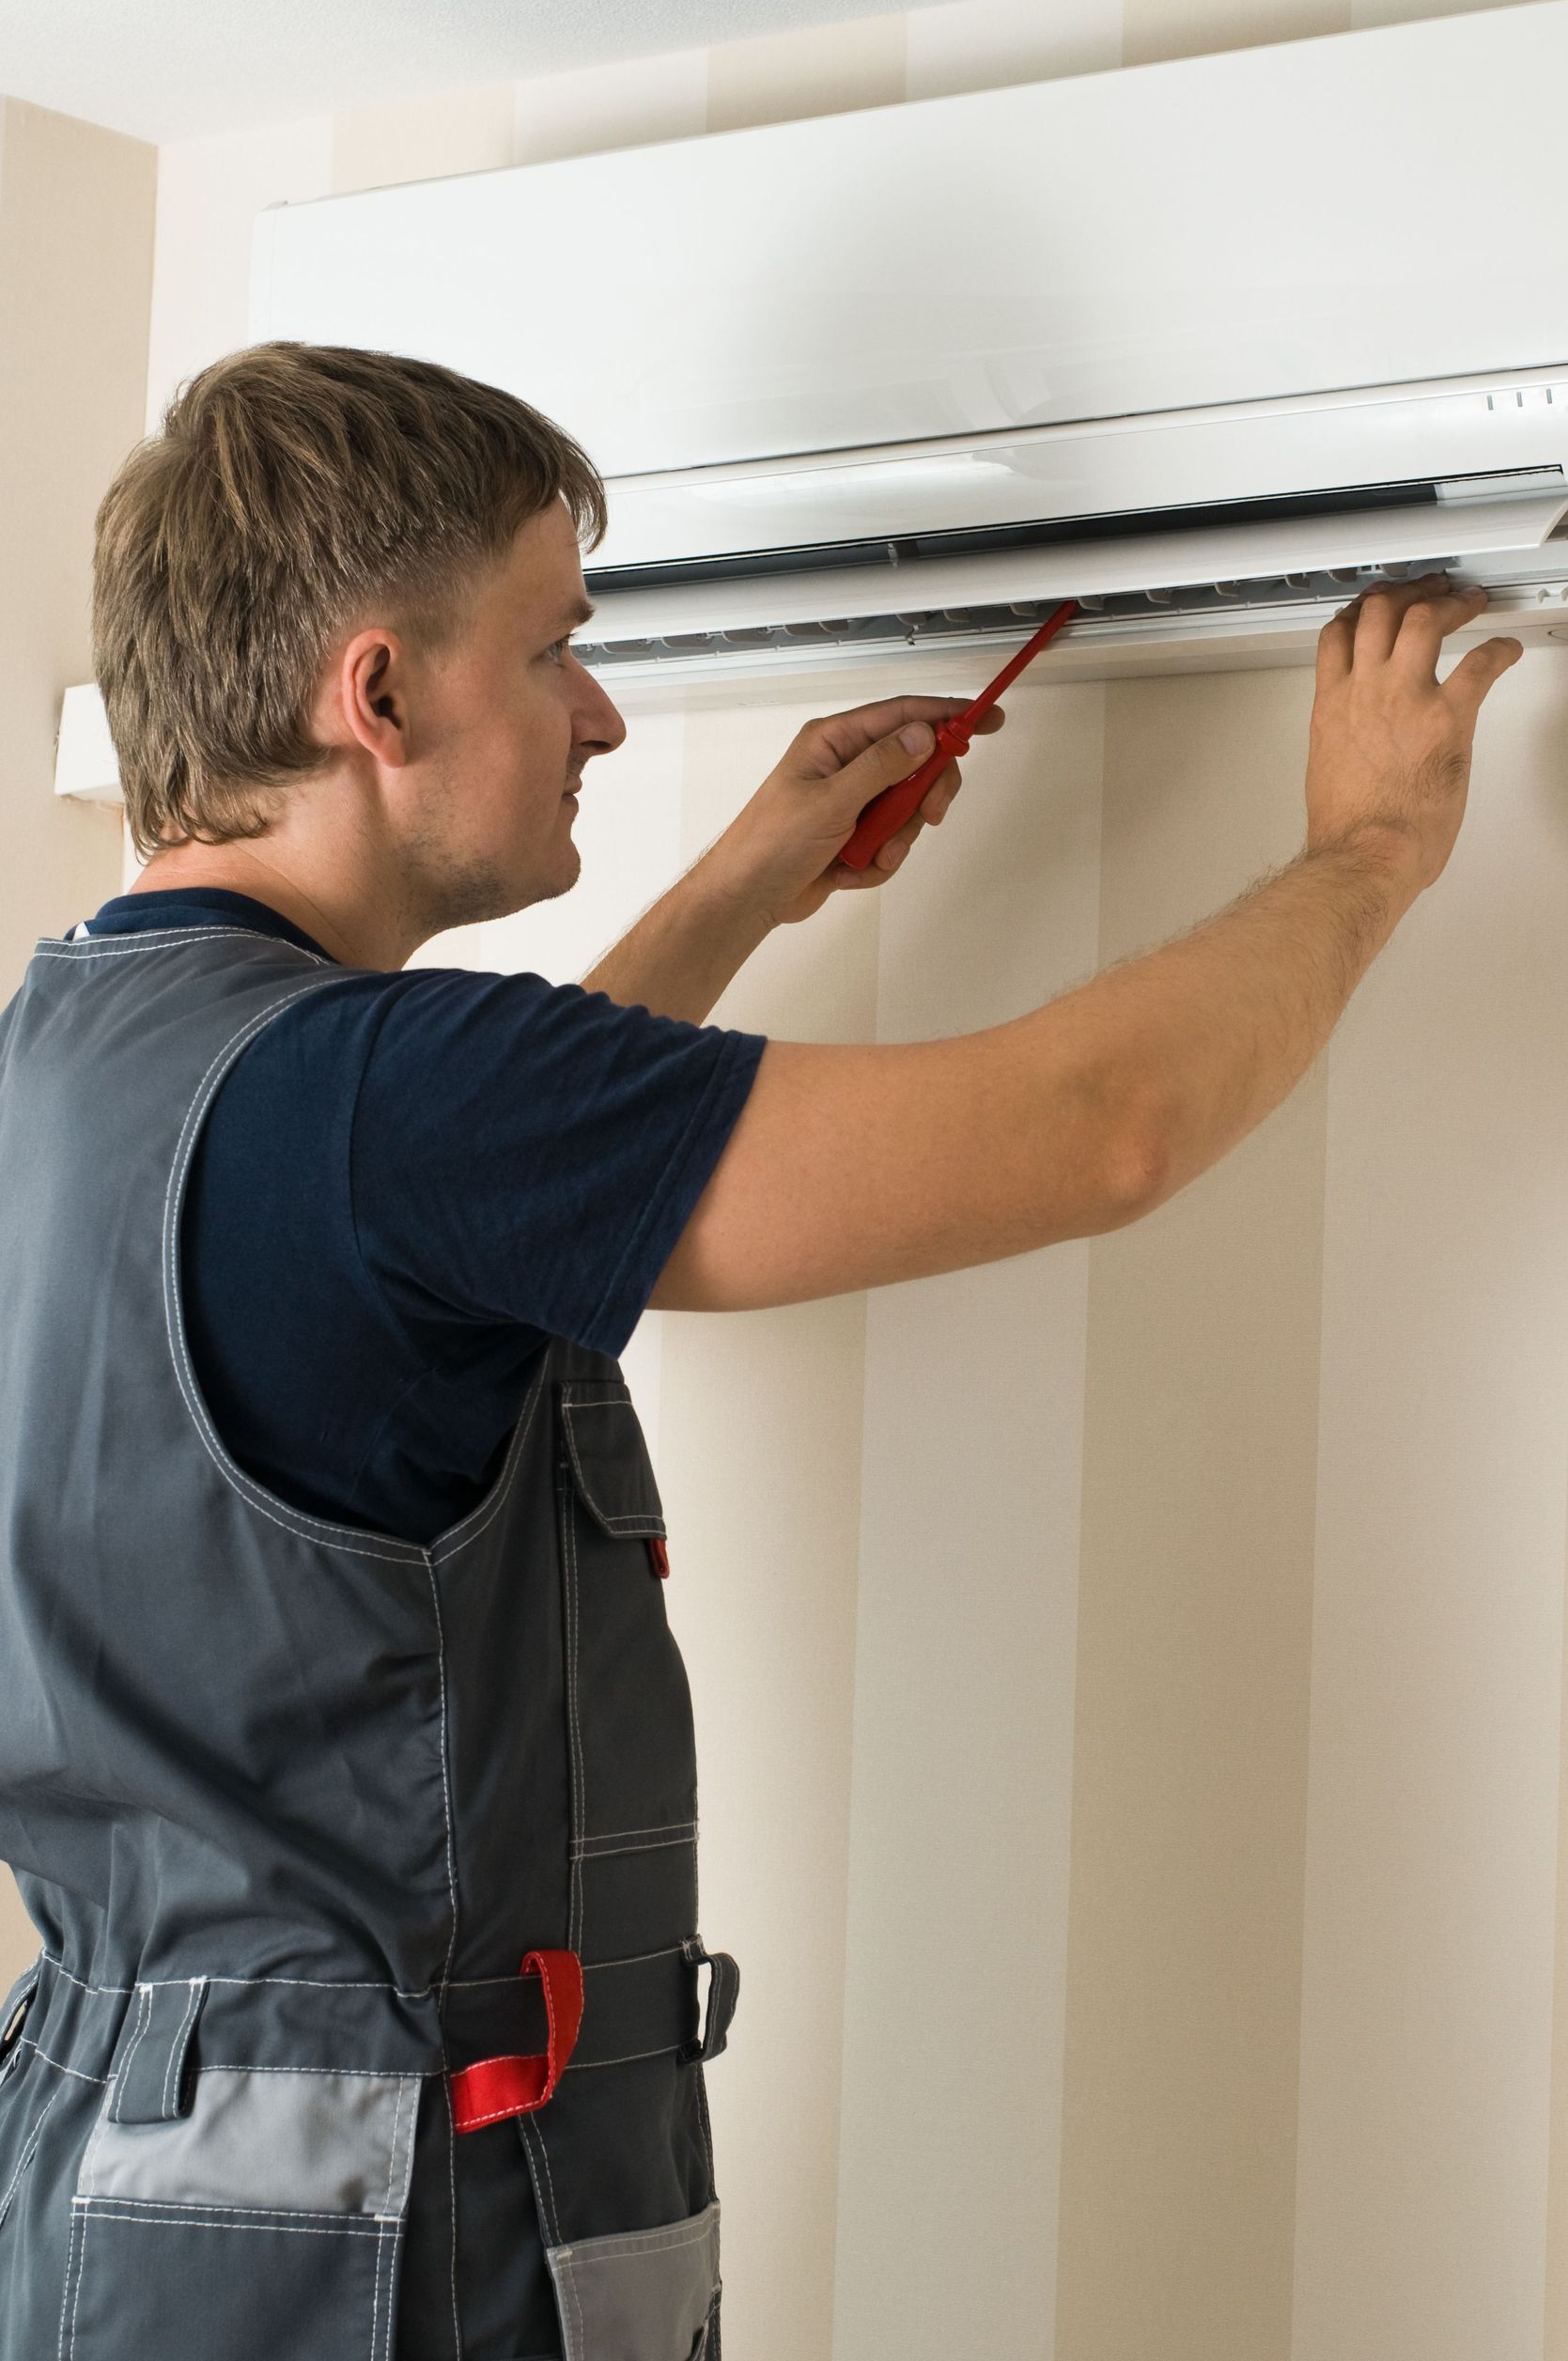 How to Know When to Call an Air Conditioning Service in Fort Myers, FL